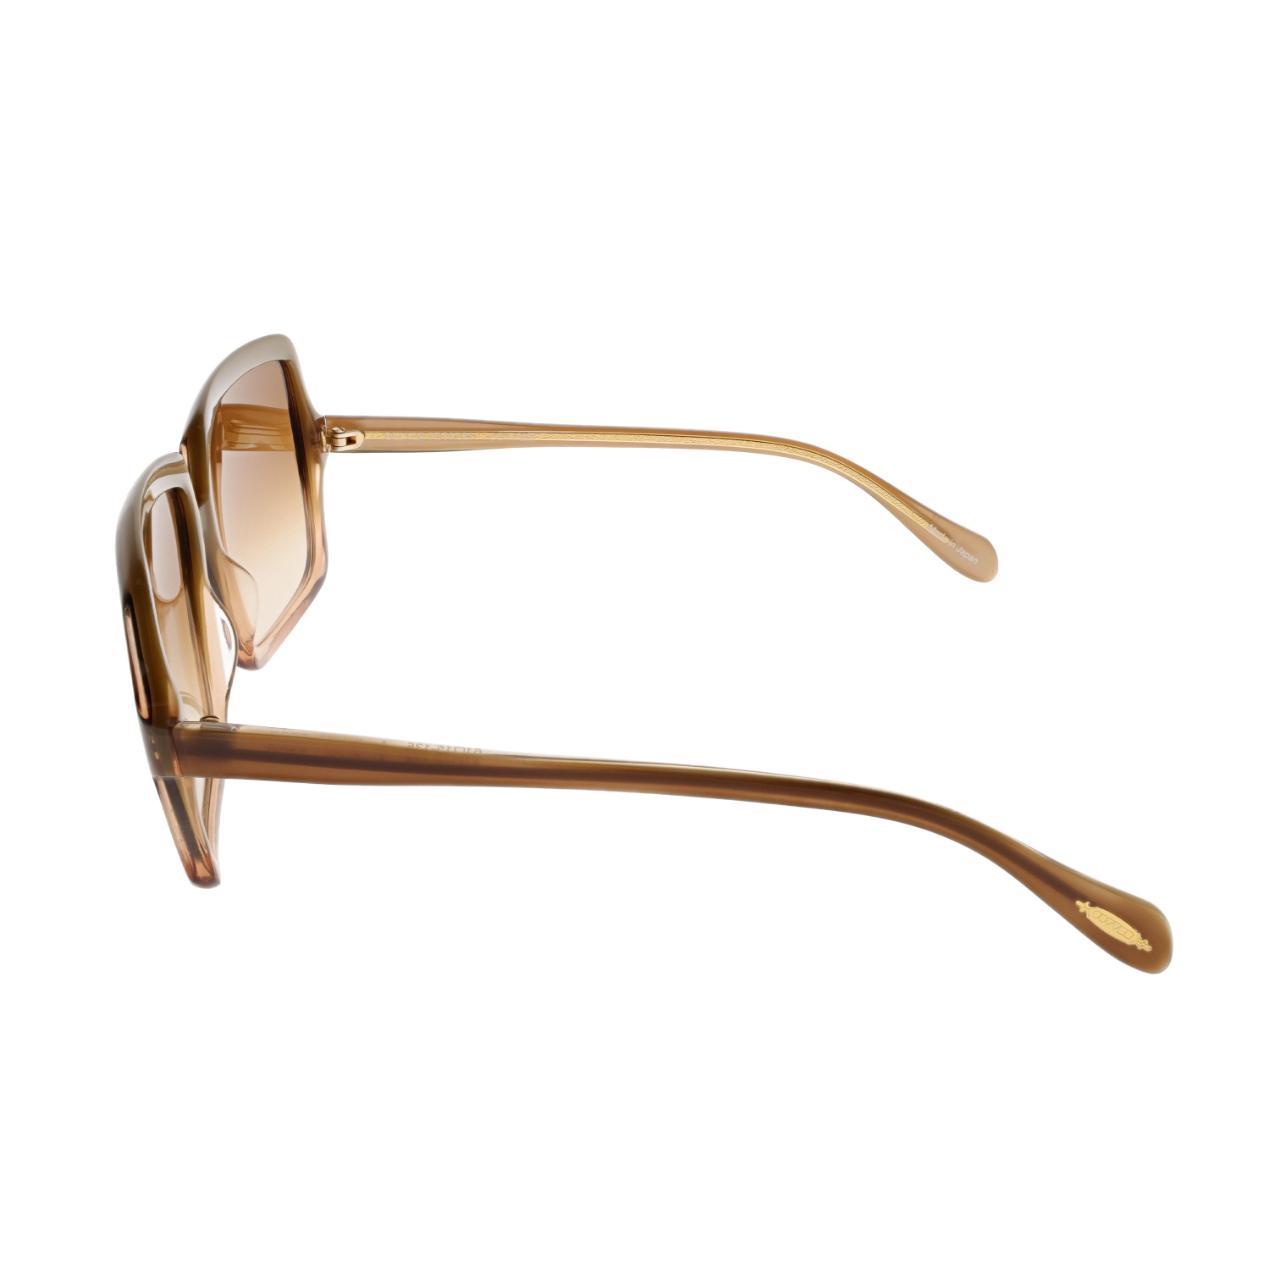 Product Image 3 - OLIVER PEOPLES APOLLONIA SUNGLASSES

Oliver Peoples